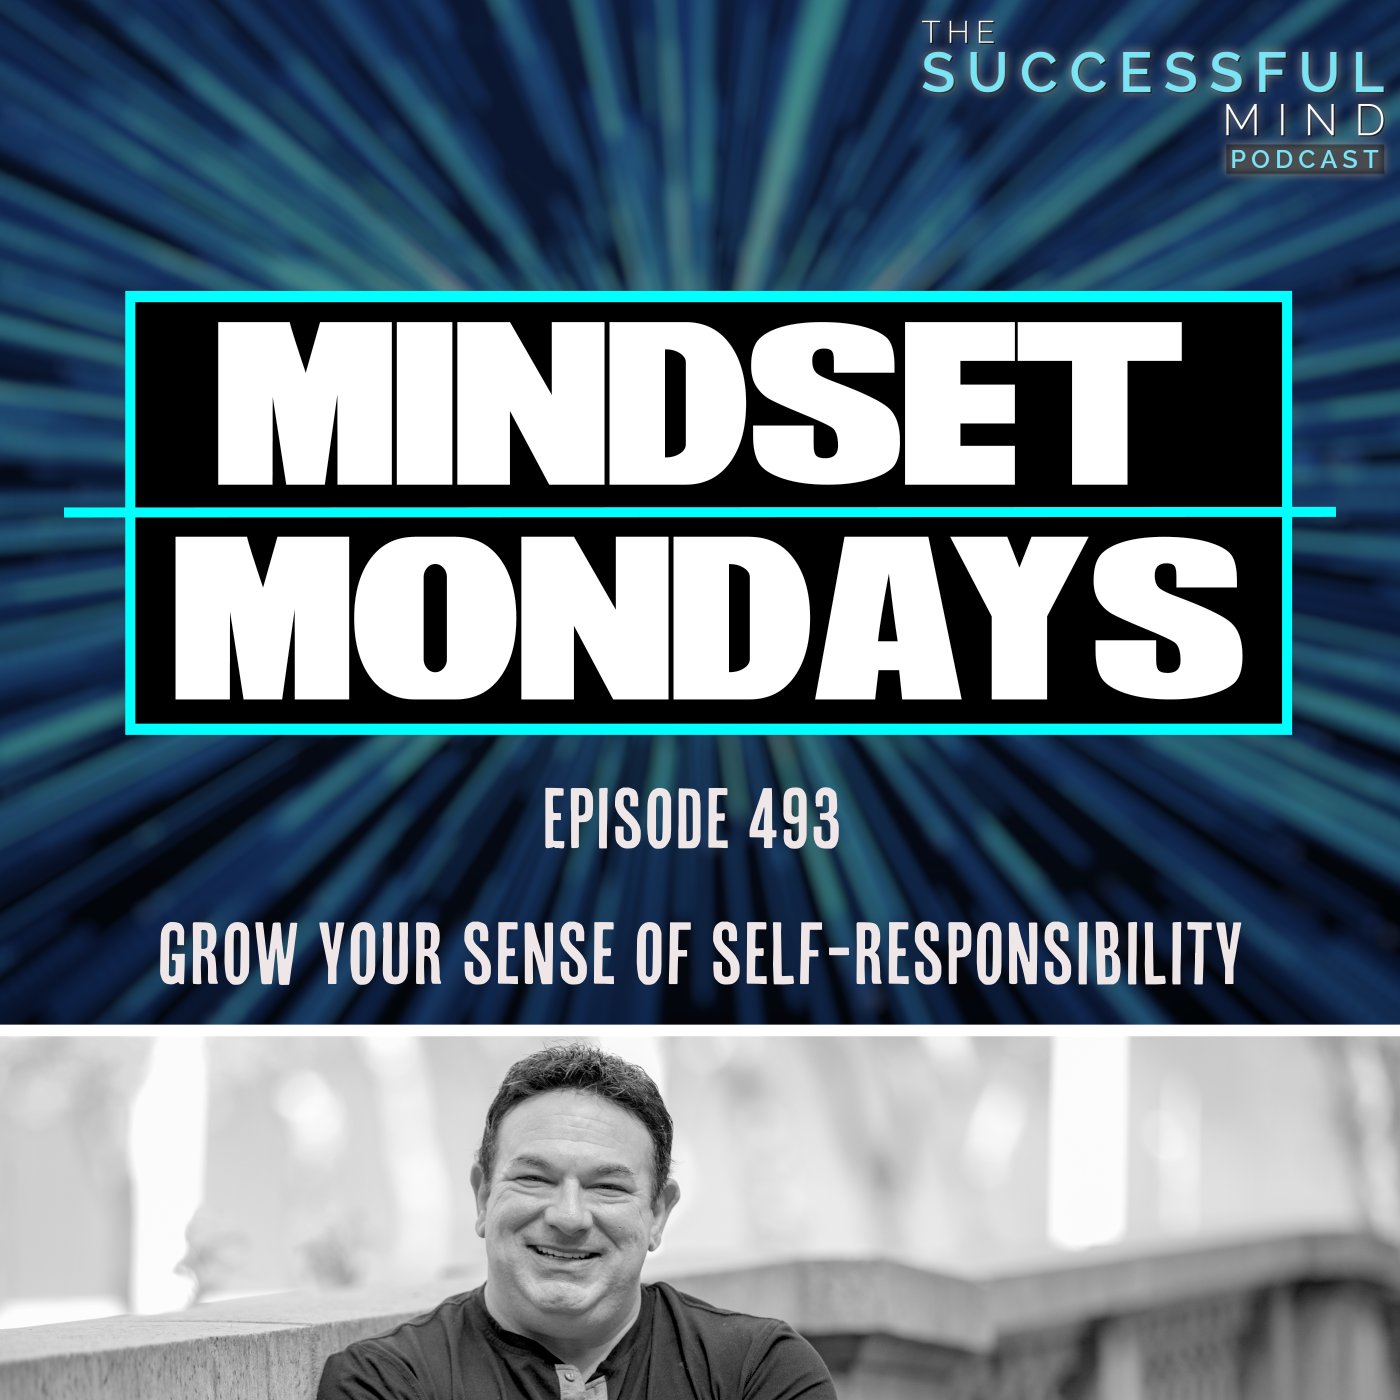 The Successful Mind Podcast - Episode 493 - Grow Your Sense of Self-Responsibility